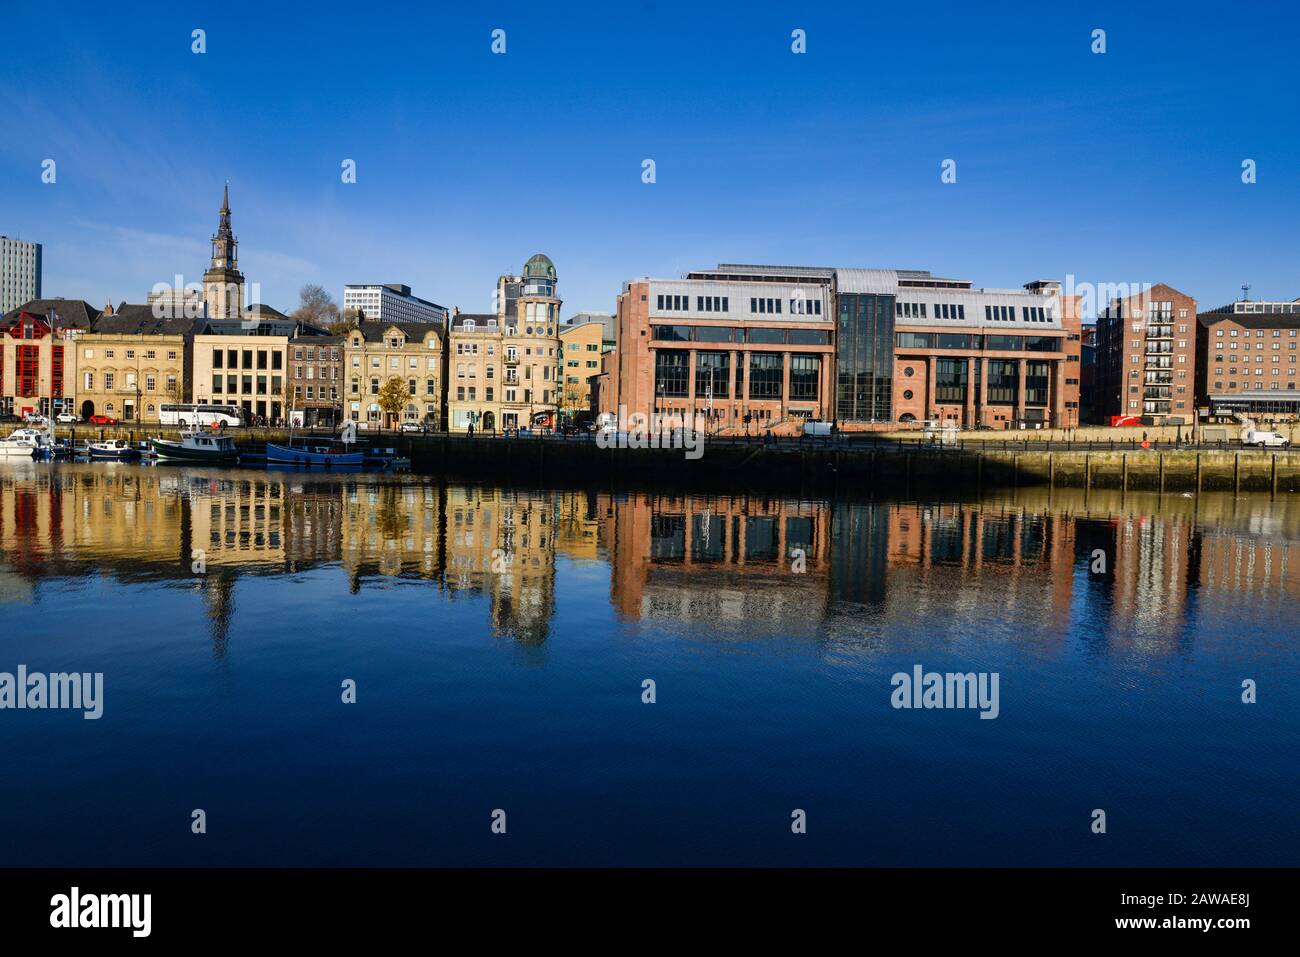 Newcastle Crown Court built out of red sandstone stands out on the Quayside on the north side of the River Tyne Stock Photo